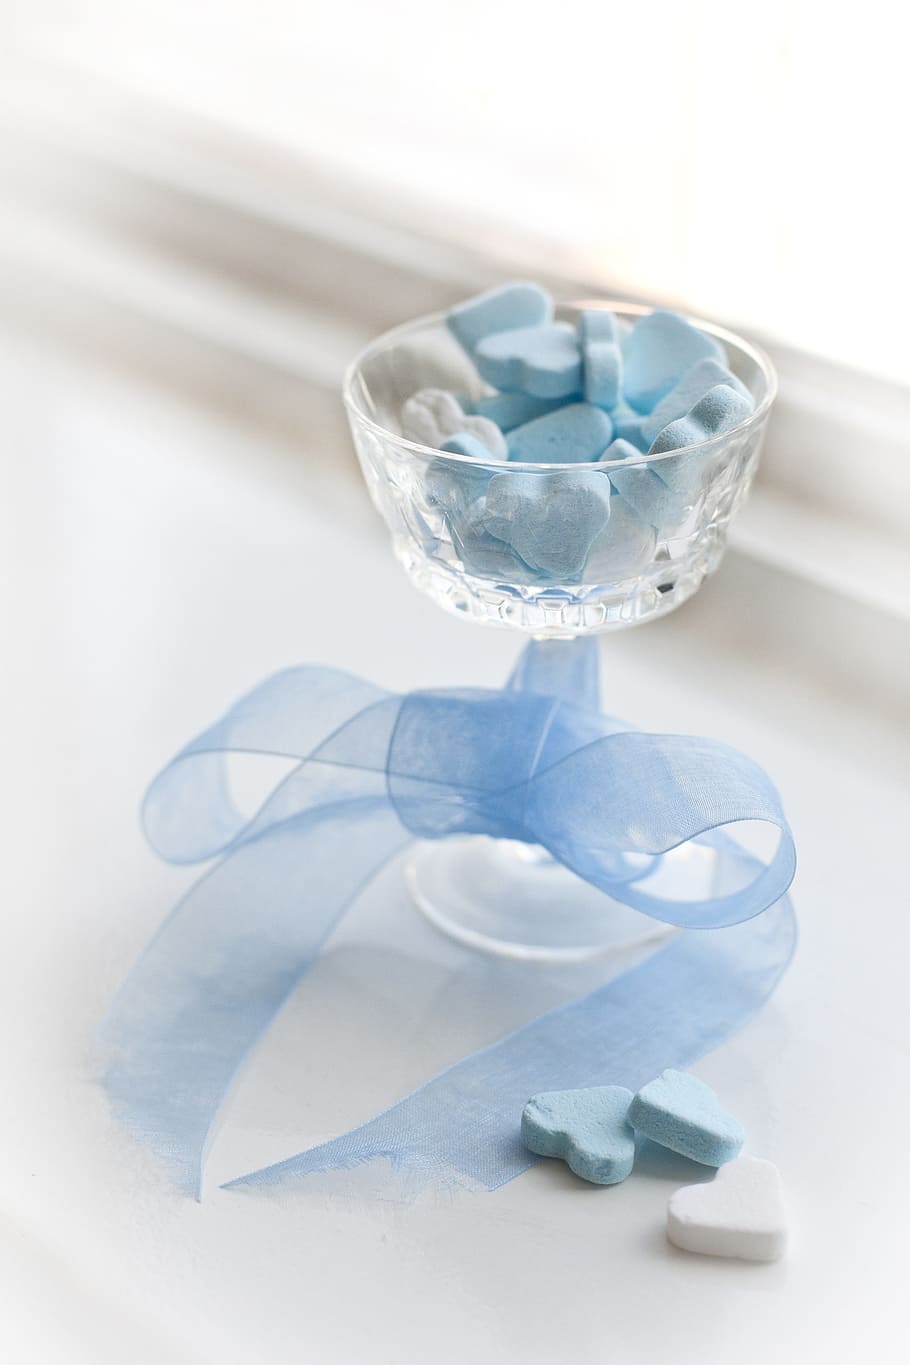 birth, please, treat, little boy, bow tie, sweets, blue, romantic, white heart, the heart of